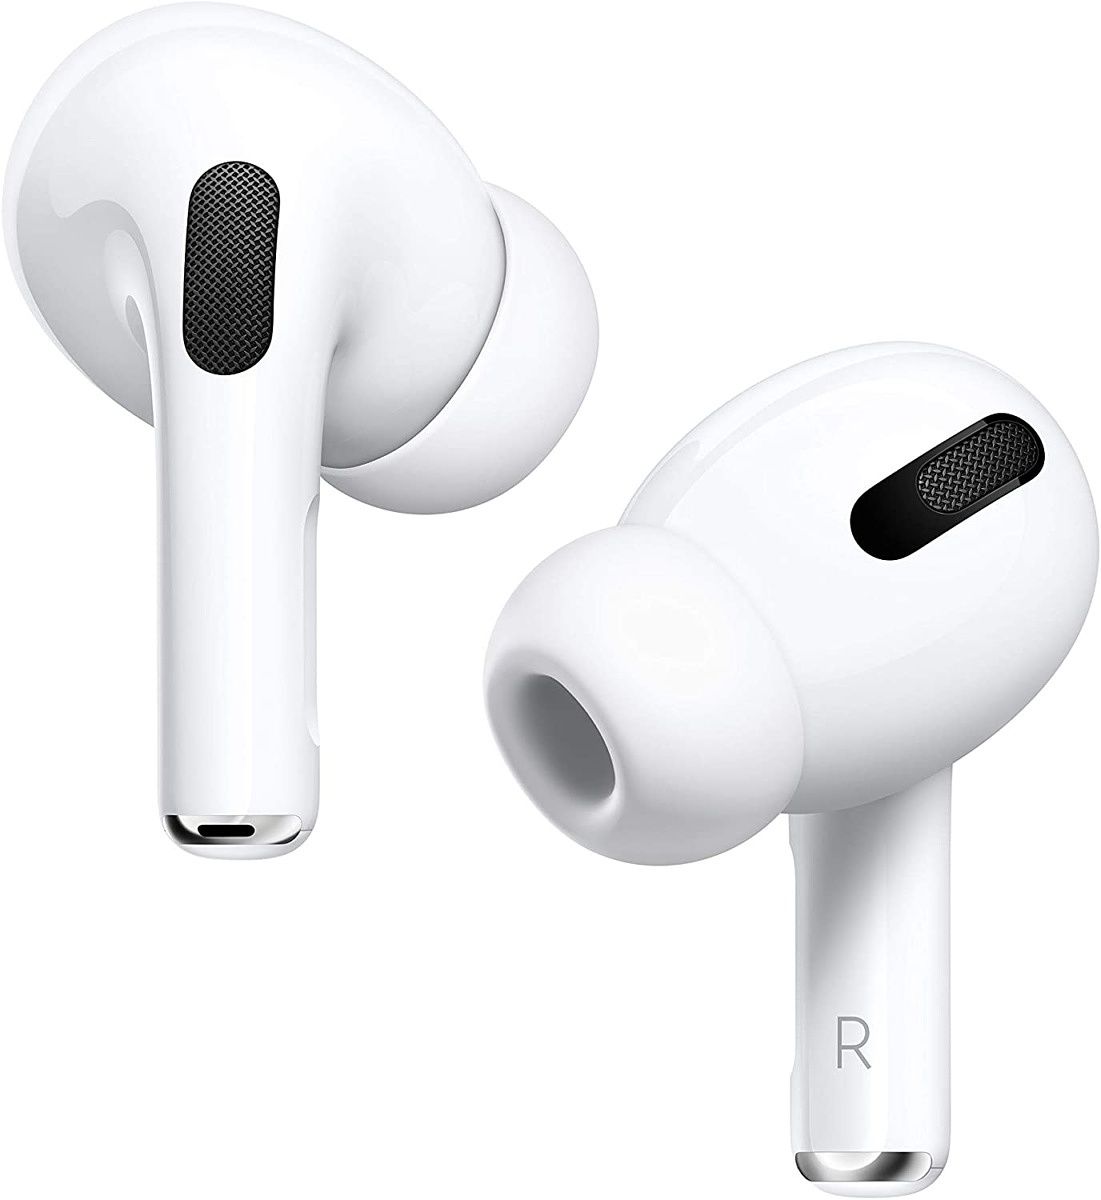 AirPods Pro are Apple's premium wireless earbuds. These come with a new design and active noise cancellation. 